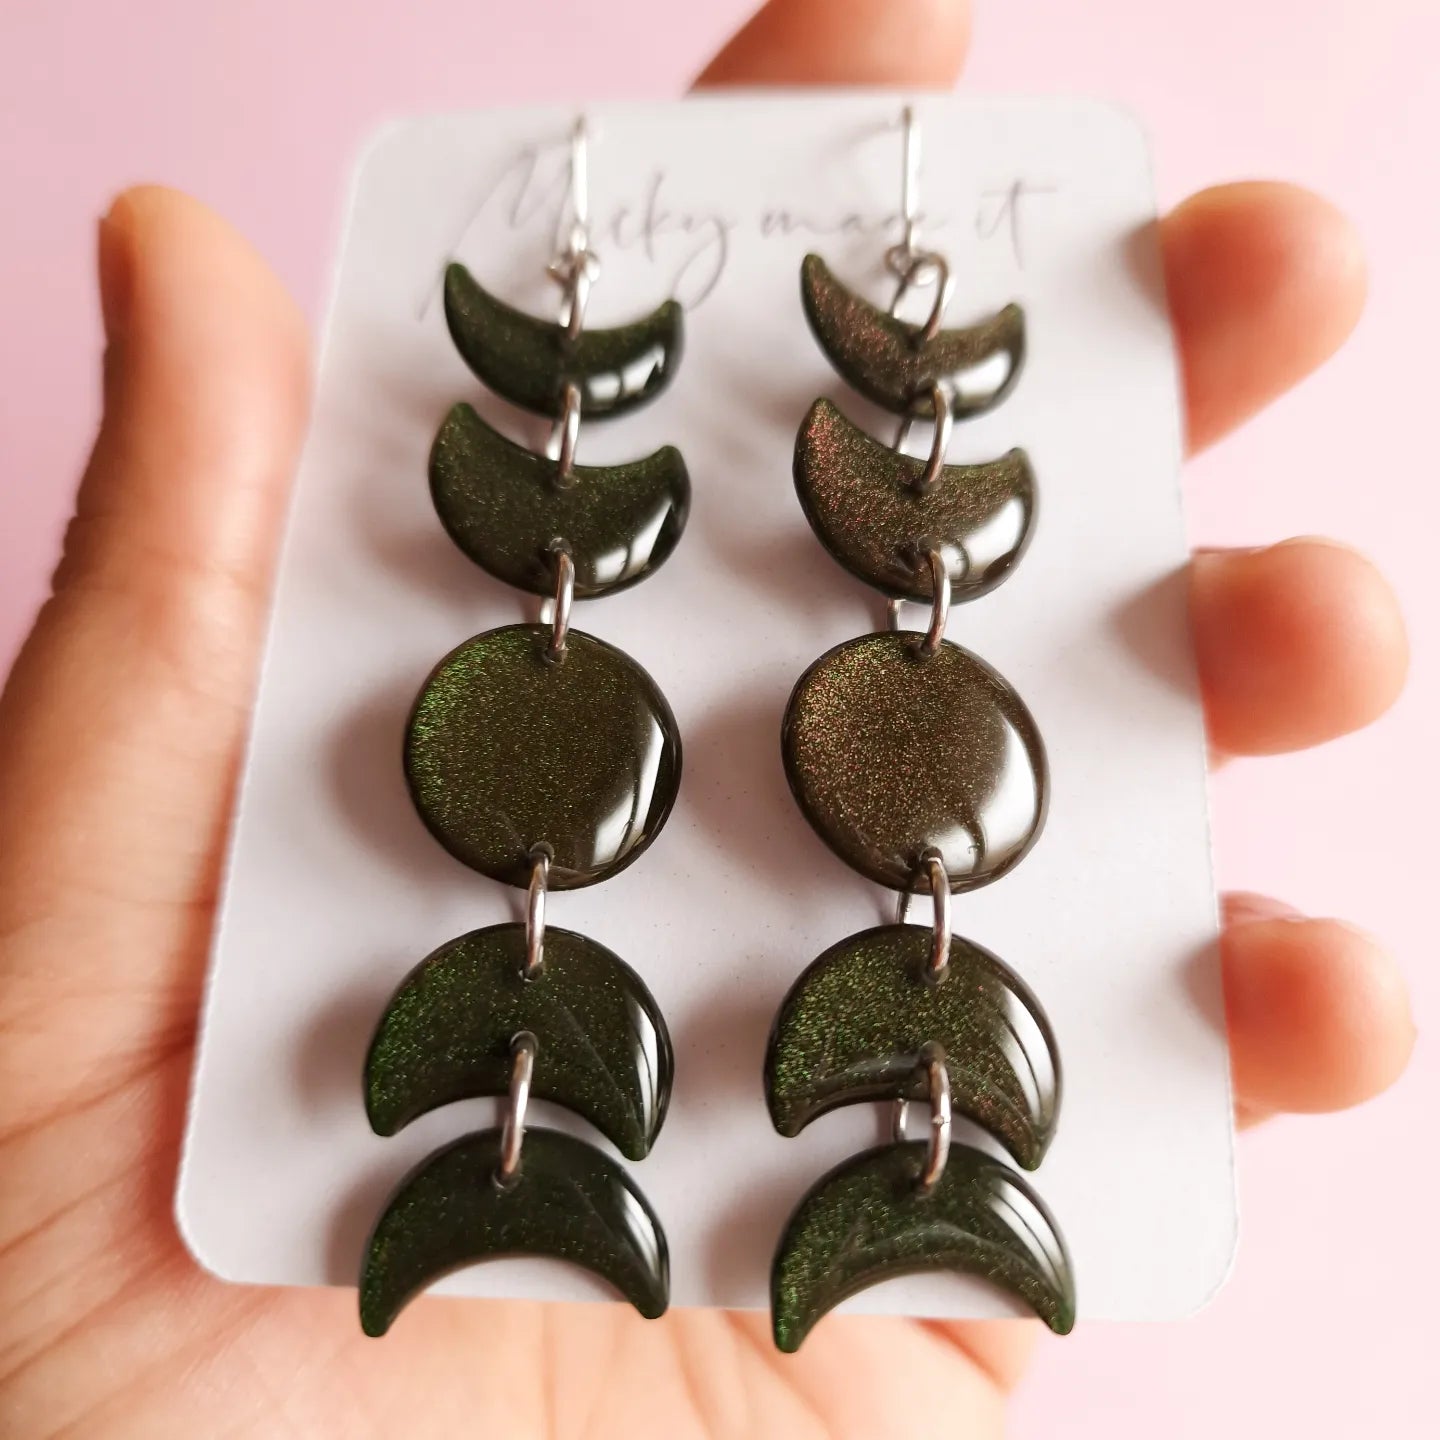 Hecate moon phase earrings in Whimsigoth